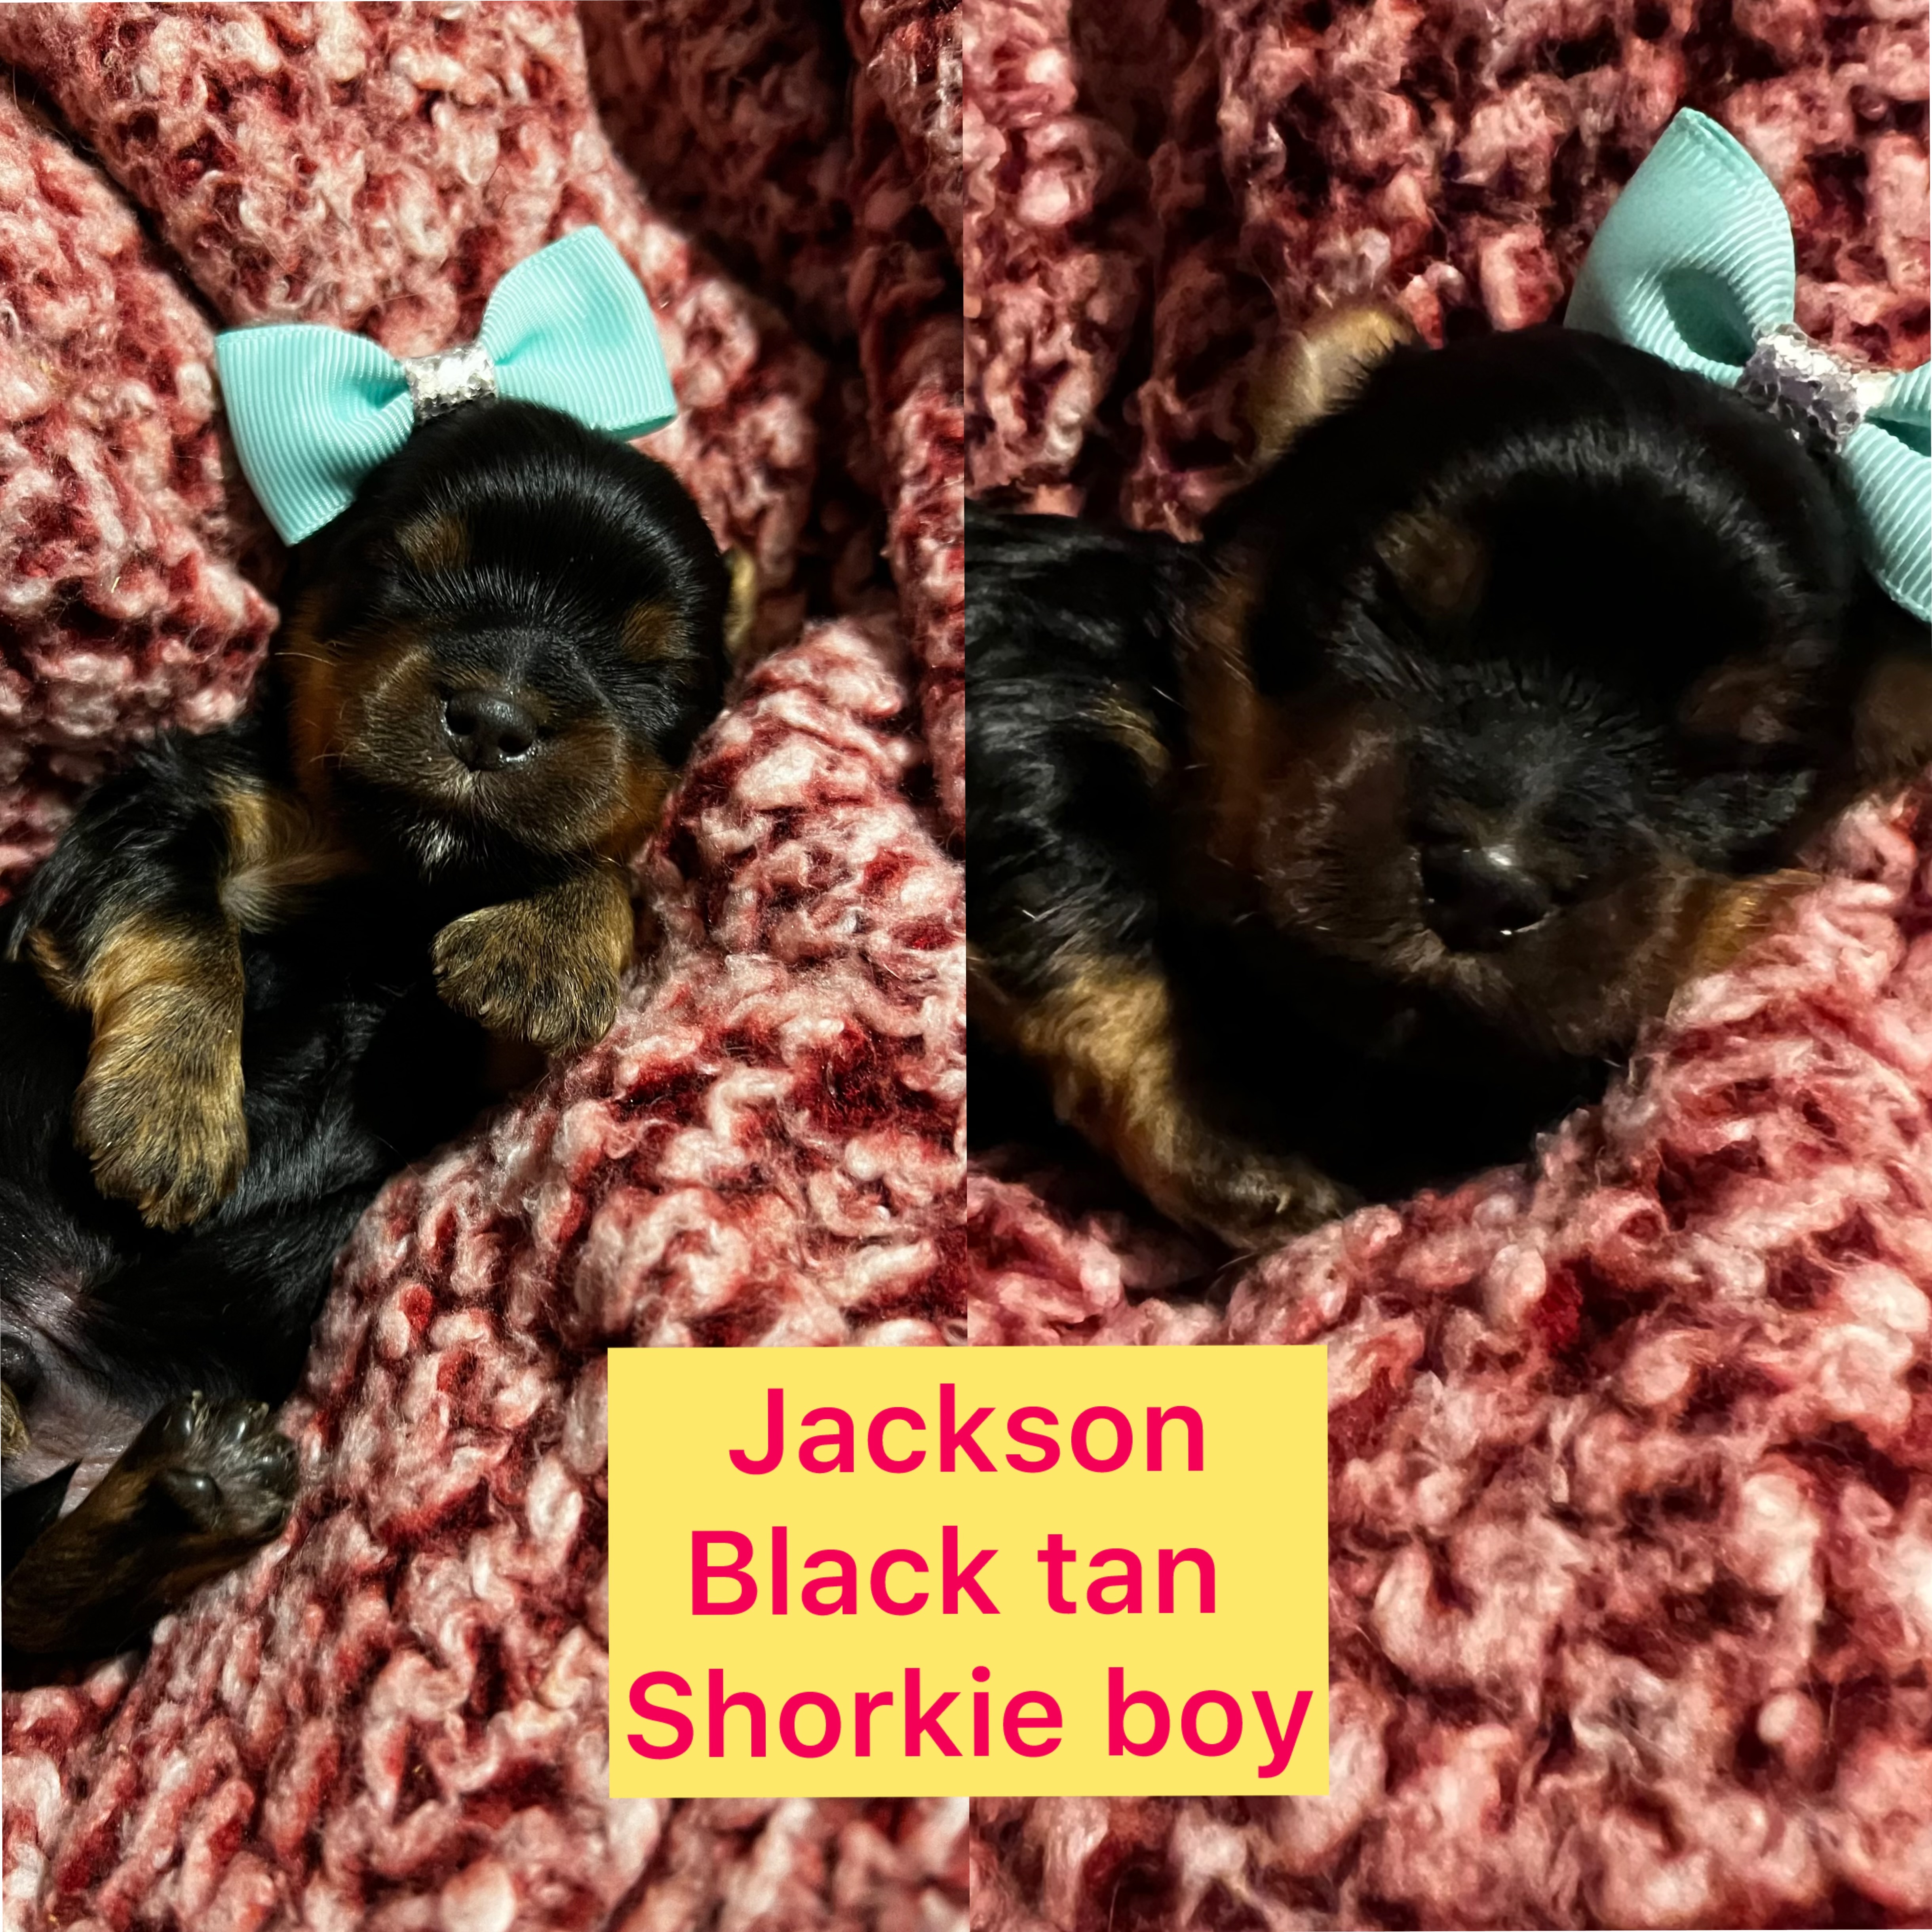 Jackson AVAILABLE shorkie boy click on pic for info